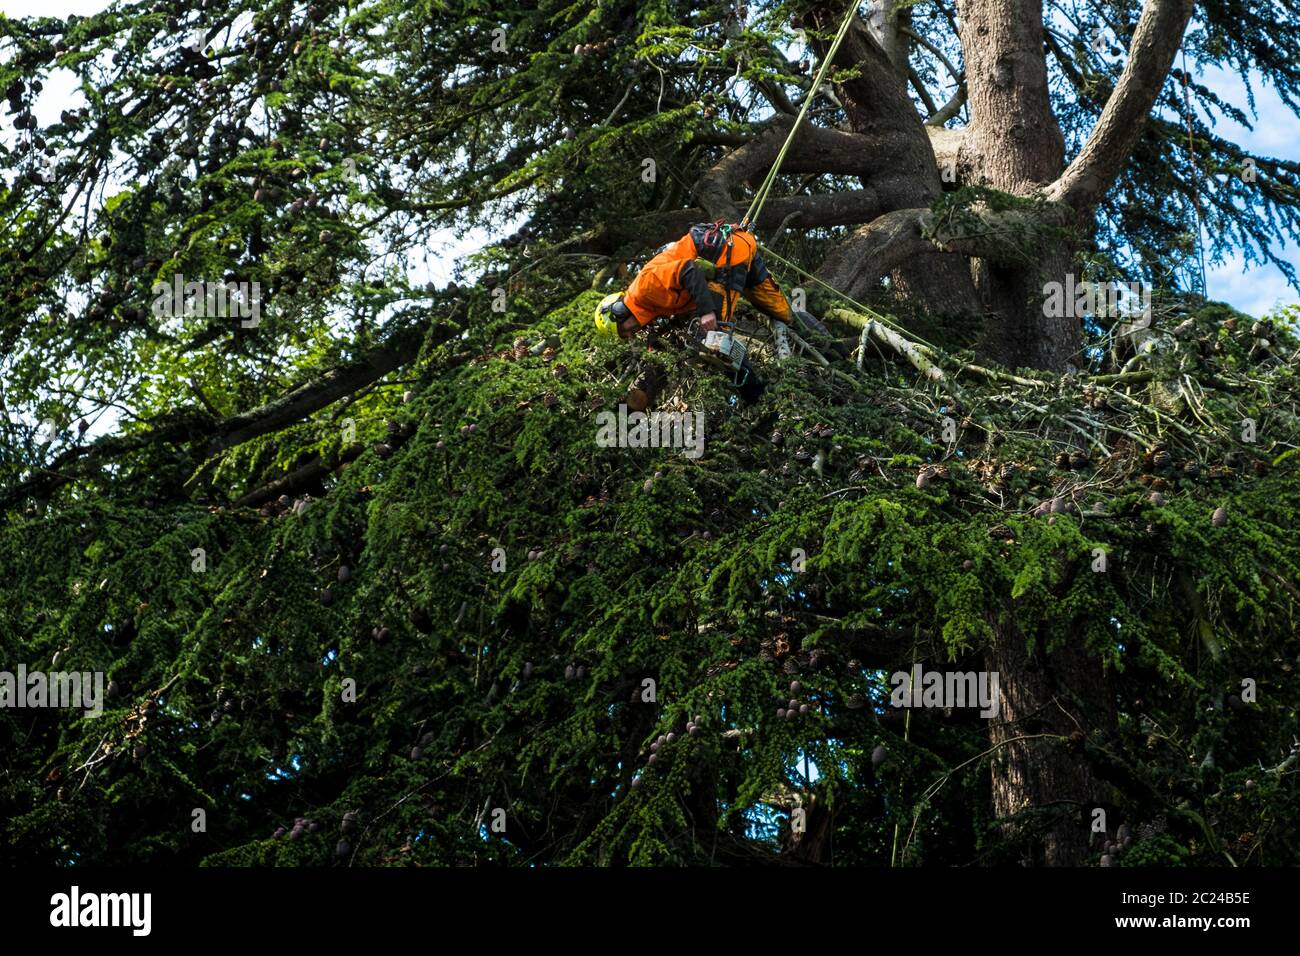 Tree surgeon in hi viz protective clothing using a chainsaw, pruning a tree. Stock Photo